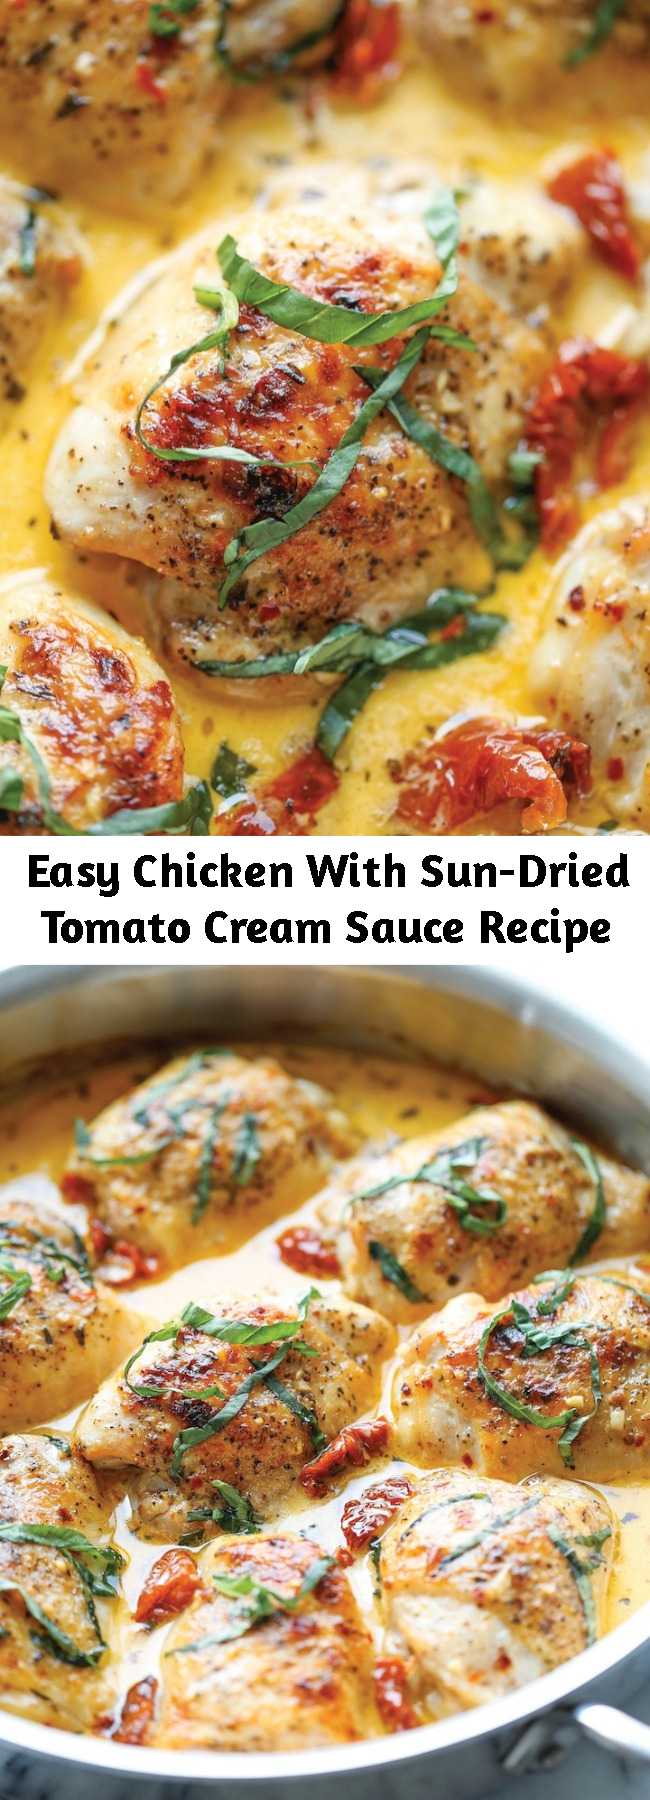 Easy Chicken With Sun-Dried Tomato Cream Sauce Recipe - Crisp-tender chicken in the most amazing cream sauce ever. It’s so good, you’ll want to guzzle down the sauce!